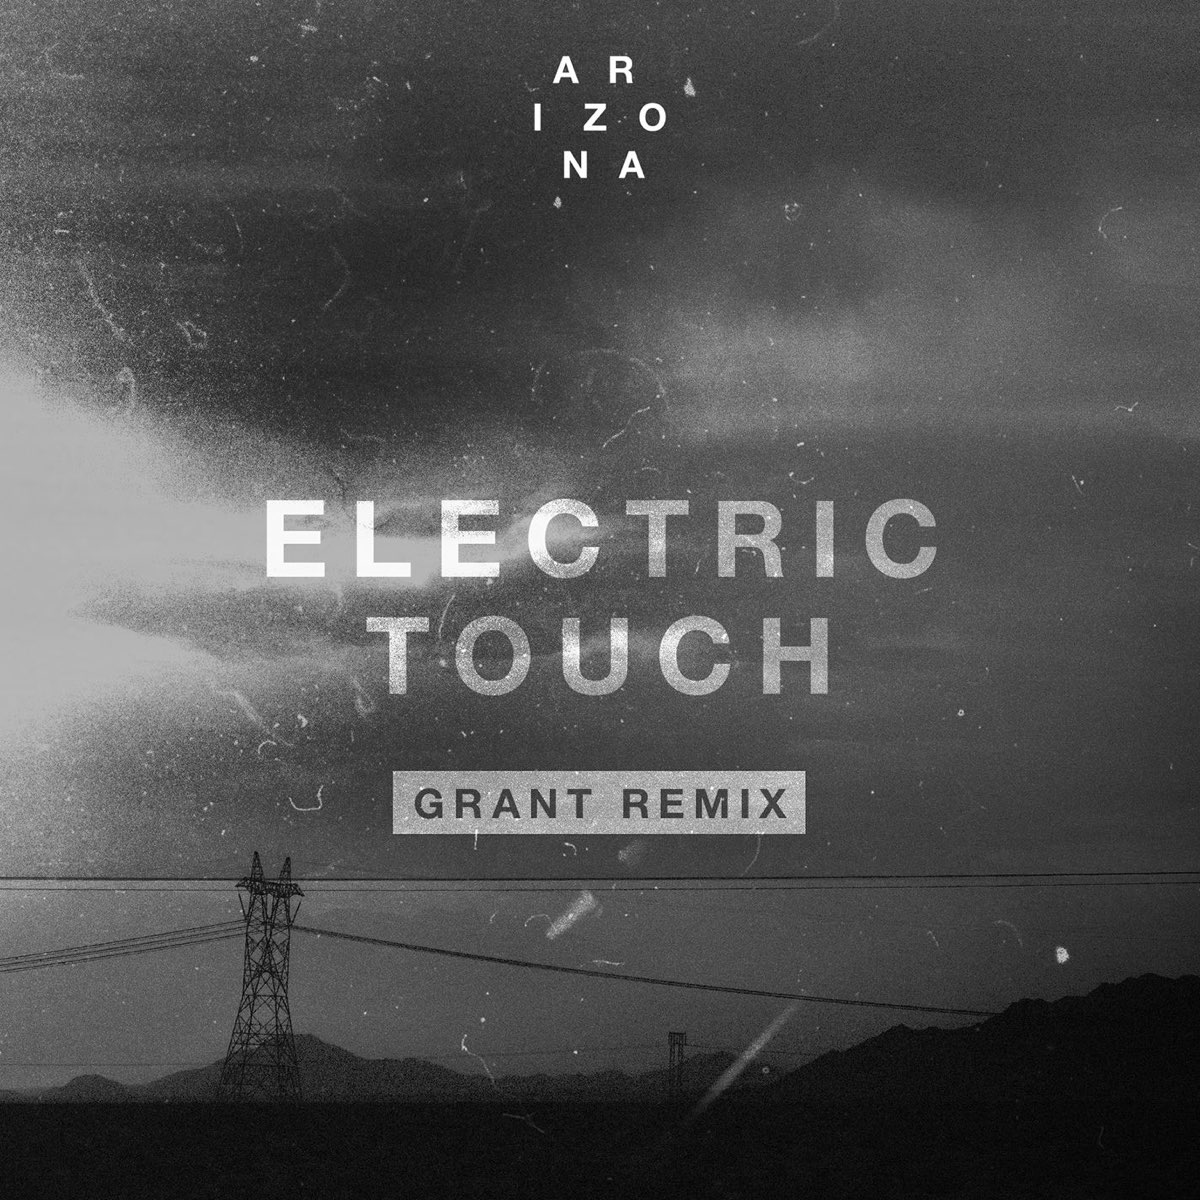 Альбом Electric Touch. A R I Z O N A обложки. Z.O.N.A обложка для видео. Dabin & Cappa - feel like (Midnight Kids Remix). Blonde remix